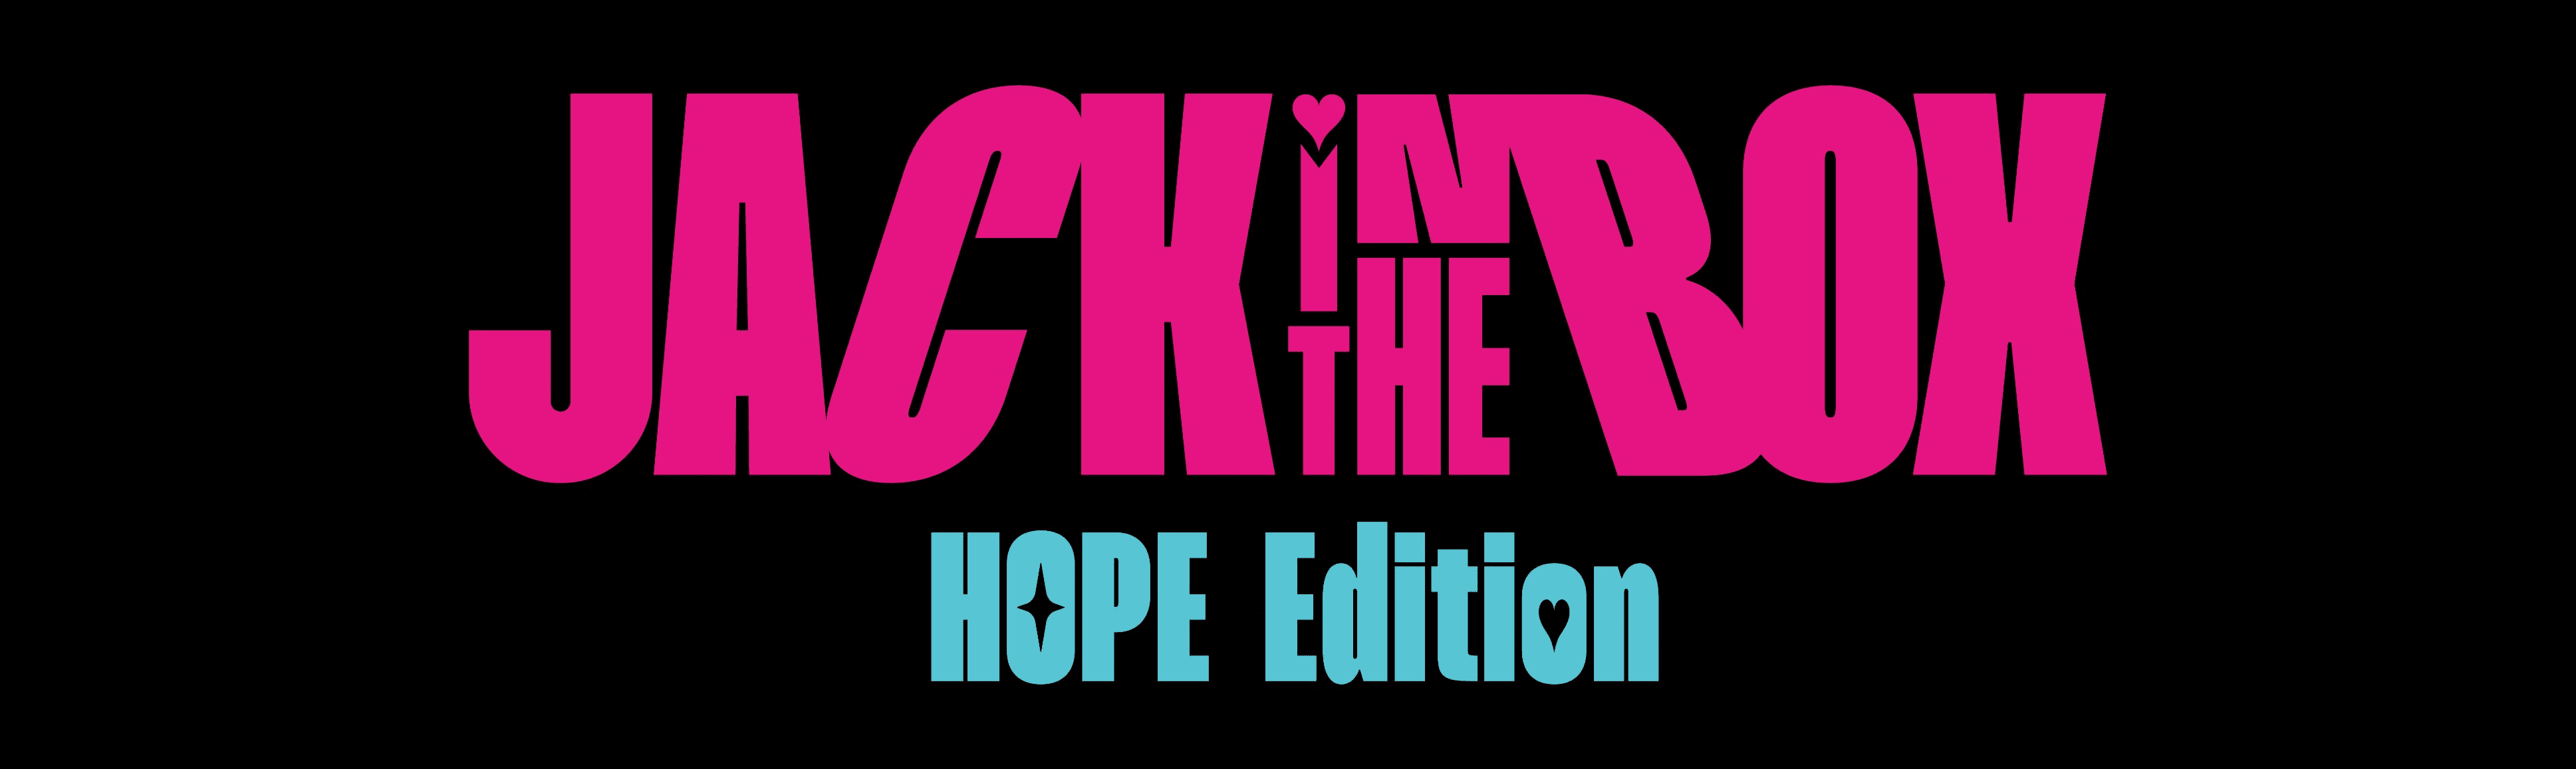 J-Hope (BTS) Jack in the Box HOPE Edition - Title Art